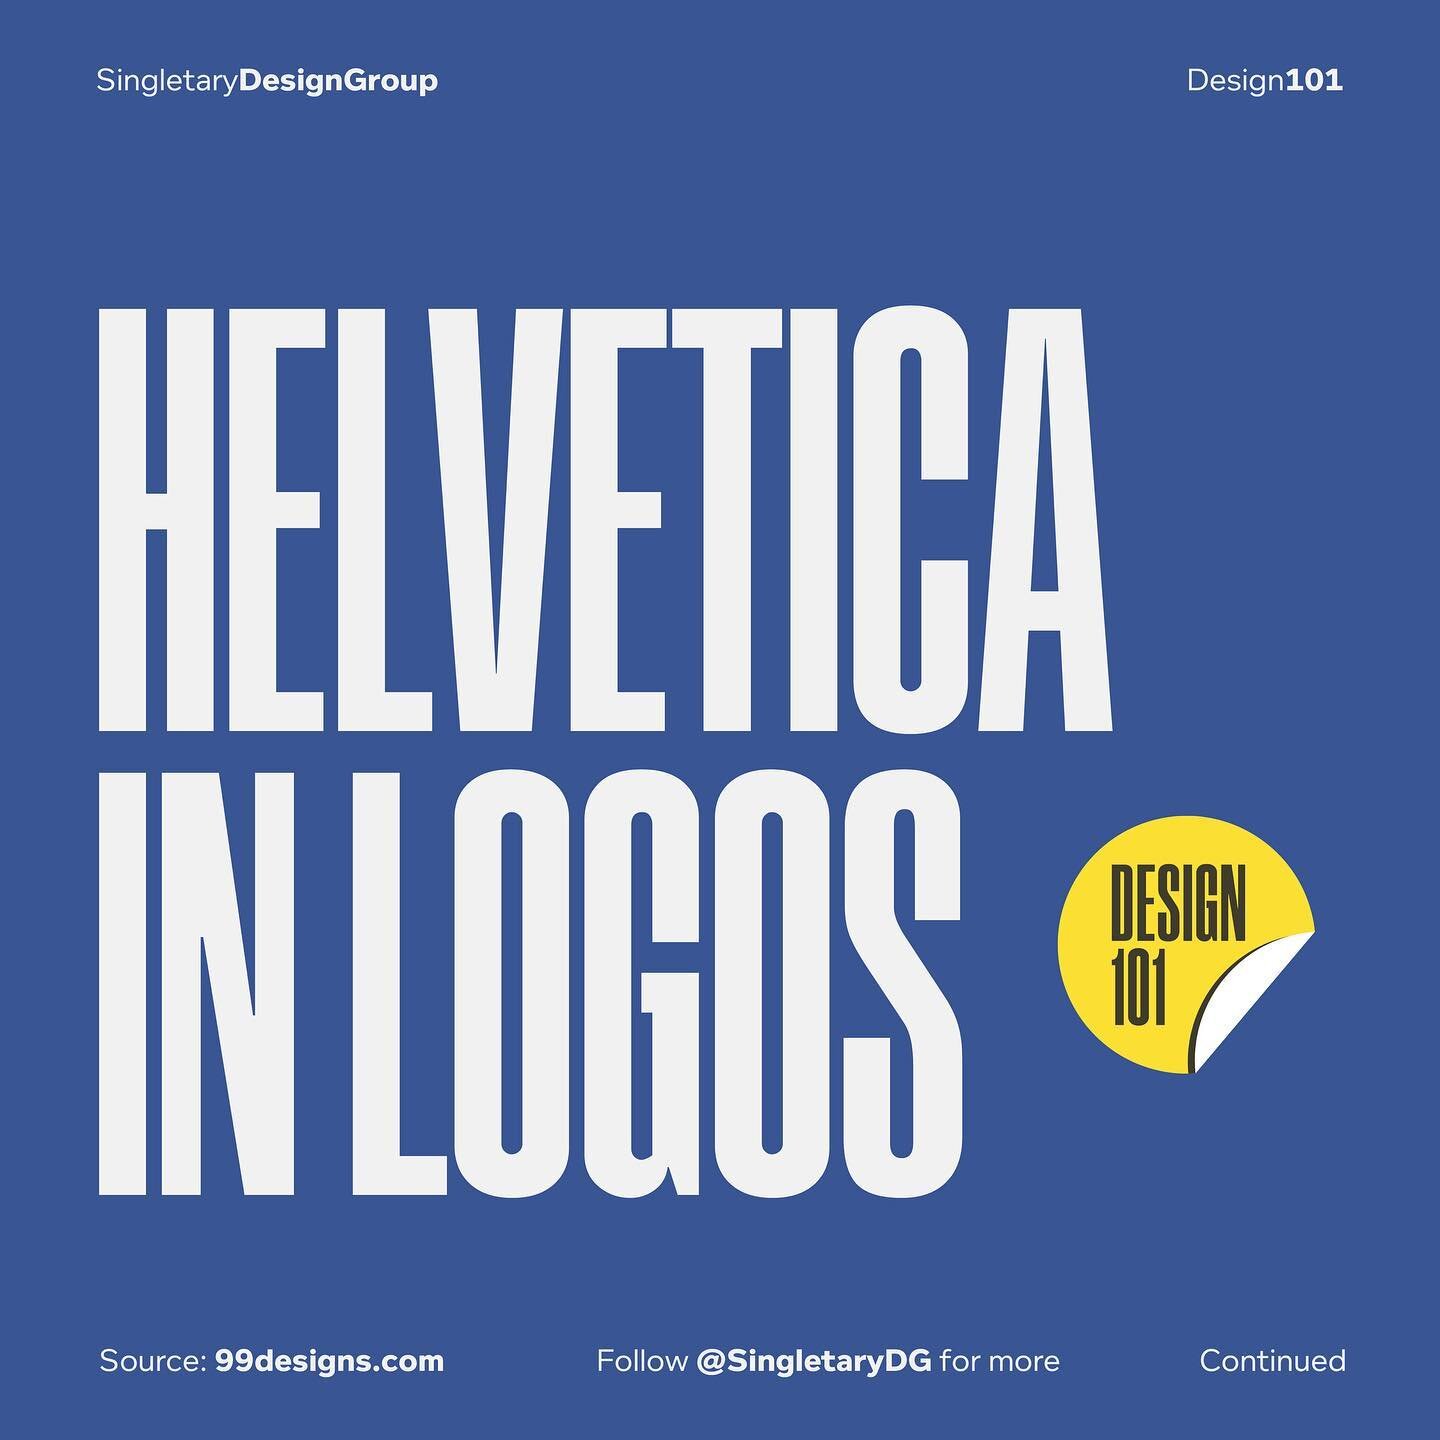 Our beloved Helvetica, of the most beautiful typefaces that&rsquo;s used in so many well known logos! Which one did you already know of before seeing this post? 💡
.
.
.
.
.
.
#logo #logodesigner #logodesigns #logos #logomaker
#logoinspirations #crea